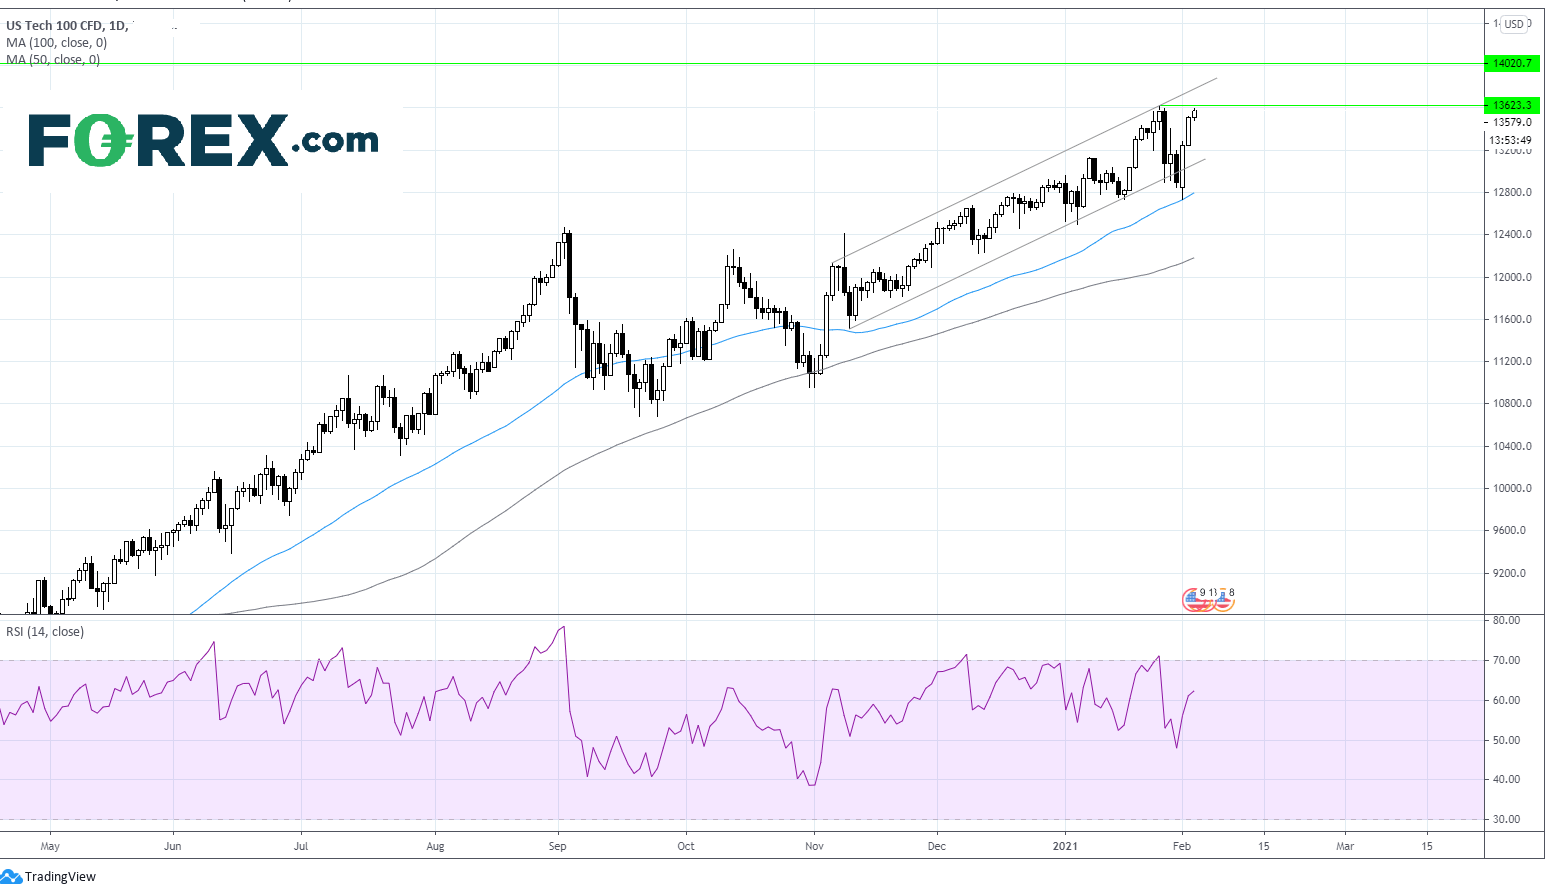 Chart analysis of the US Tech 100 over 10 month period. Published in February 2021 by FOREX.com